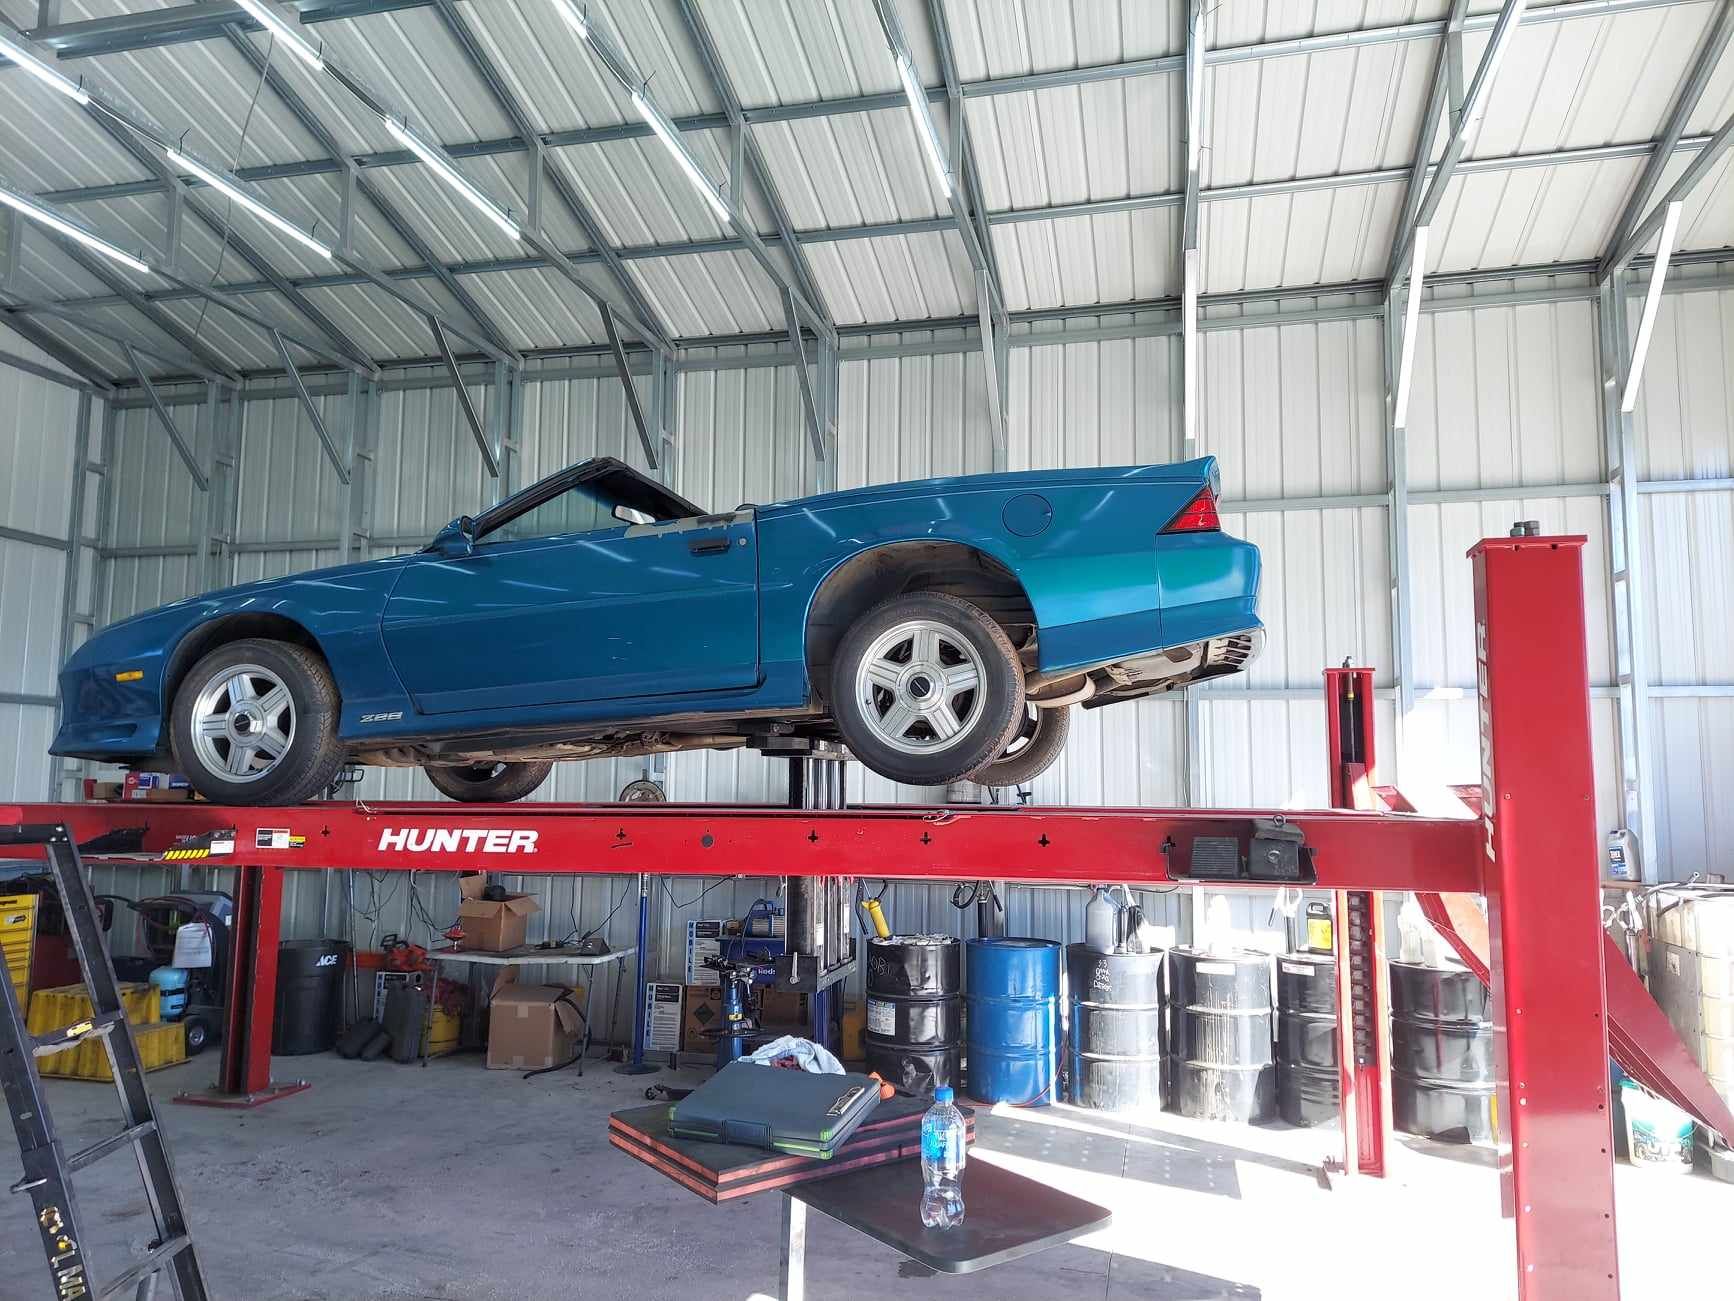 A blue car is sitting on top of a red lift in a garage.